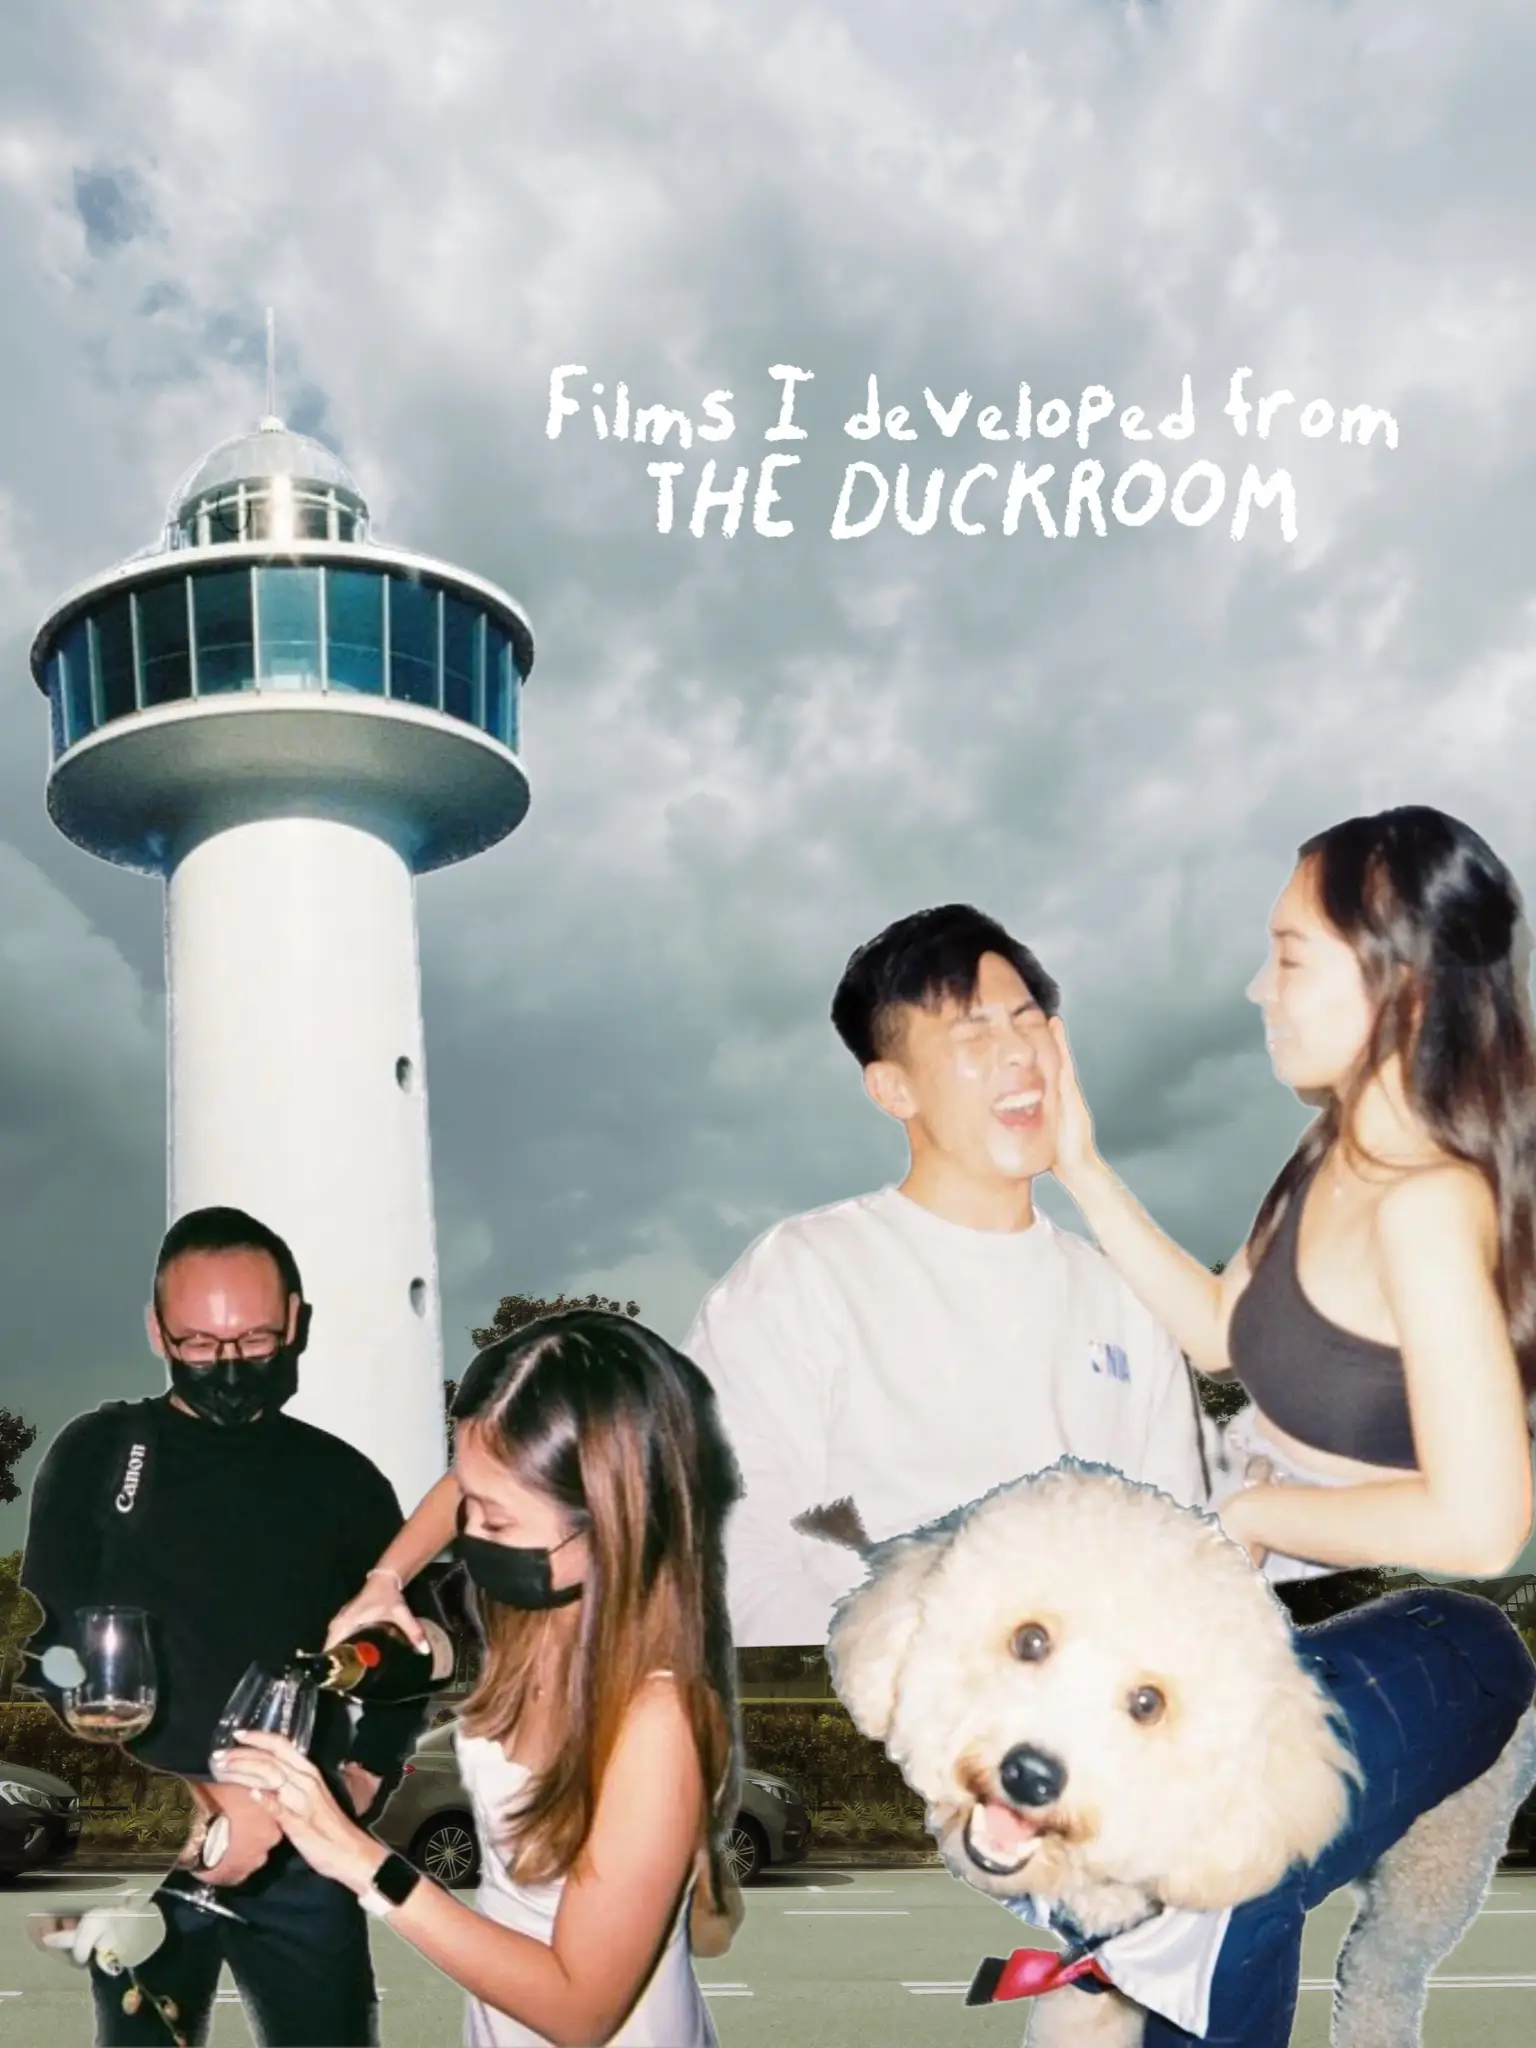 Tried out film for the first time. – THE DUCKROOM